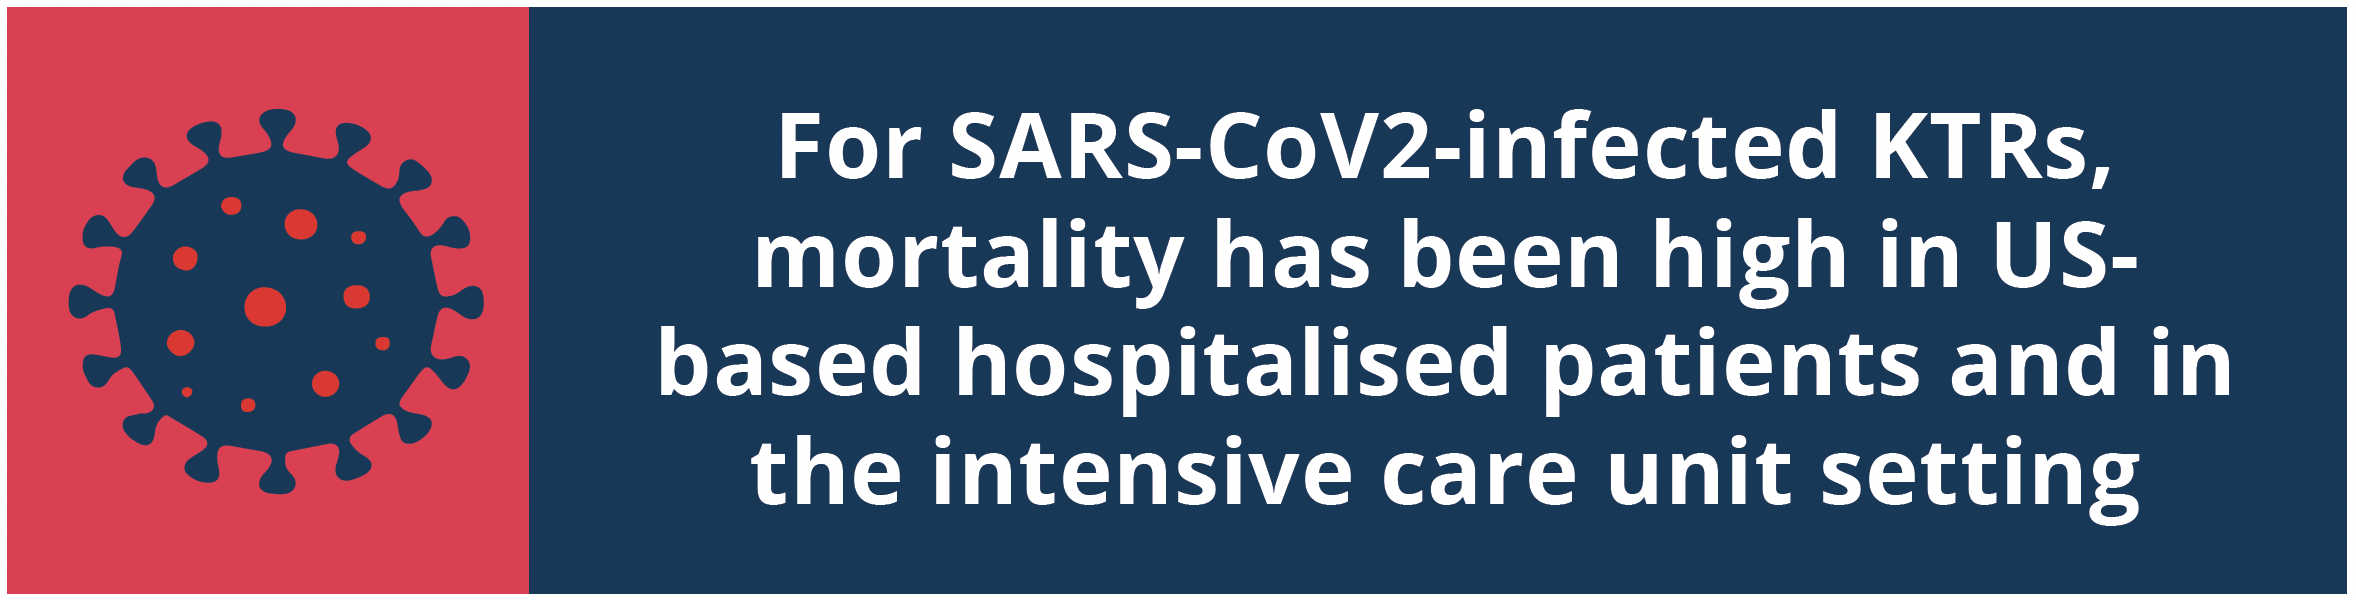 Mortality has been high in SARS-COV2-infected KTRs in US-based hospitals 